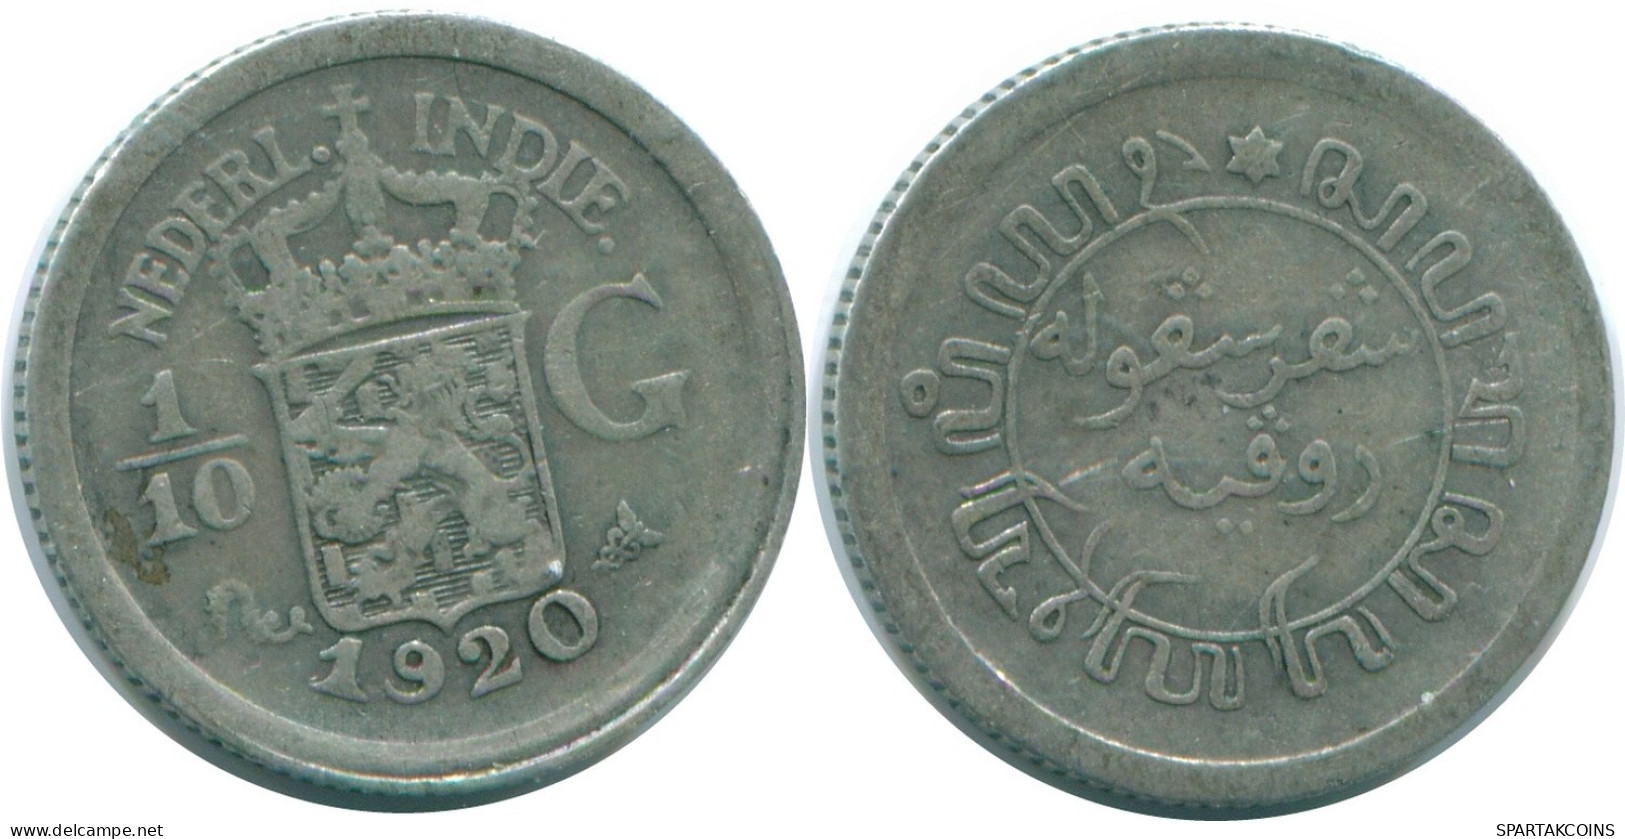 1/10 GULDEN 1920 NETHERLANDS EAST INDIES SILVER Colonial Coin #NL13369.3.U.A - Dutch East Indies